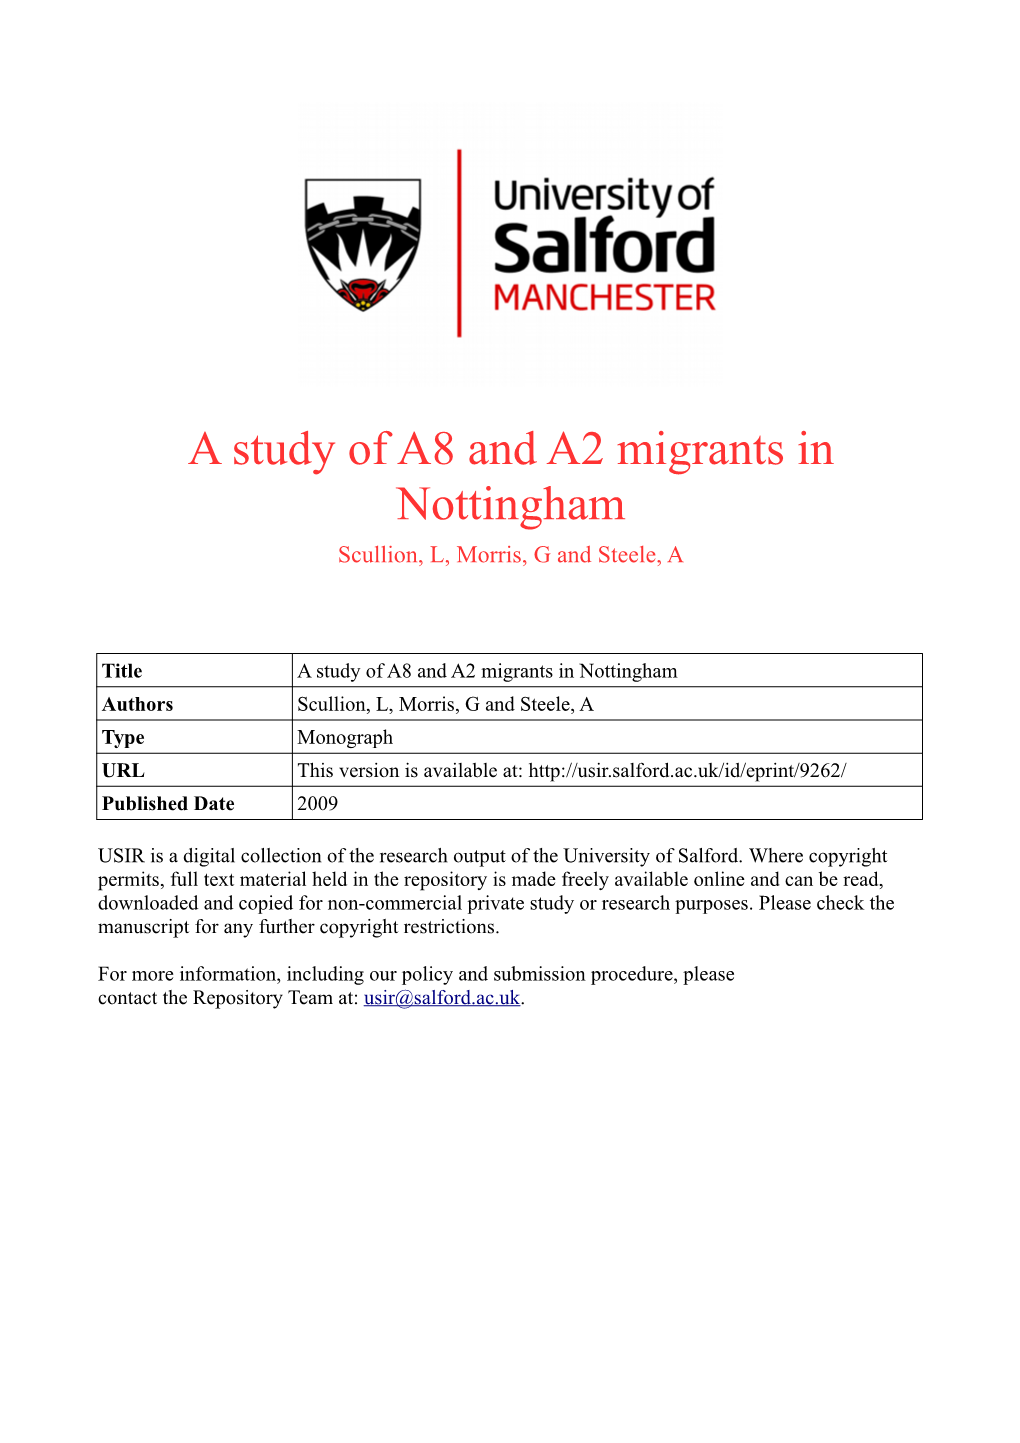 A Study of A8 and A2 Migrants in Nottingham Scullion, L, Morris, G and Steele, A